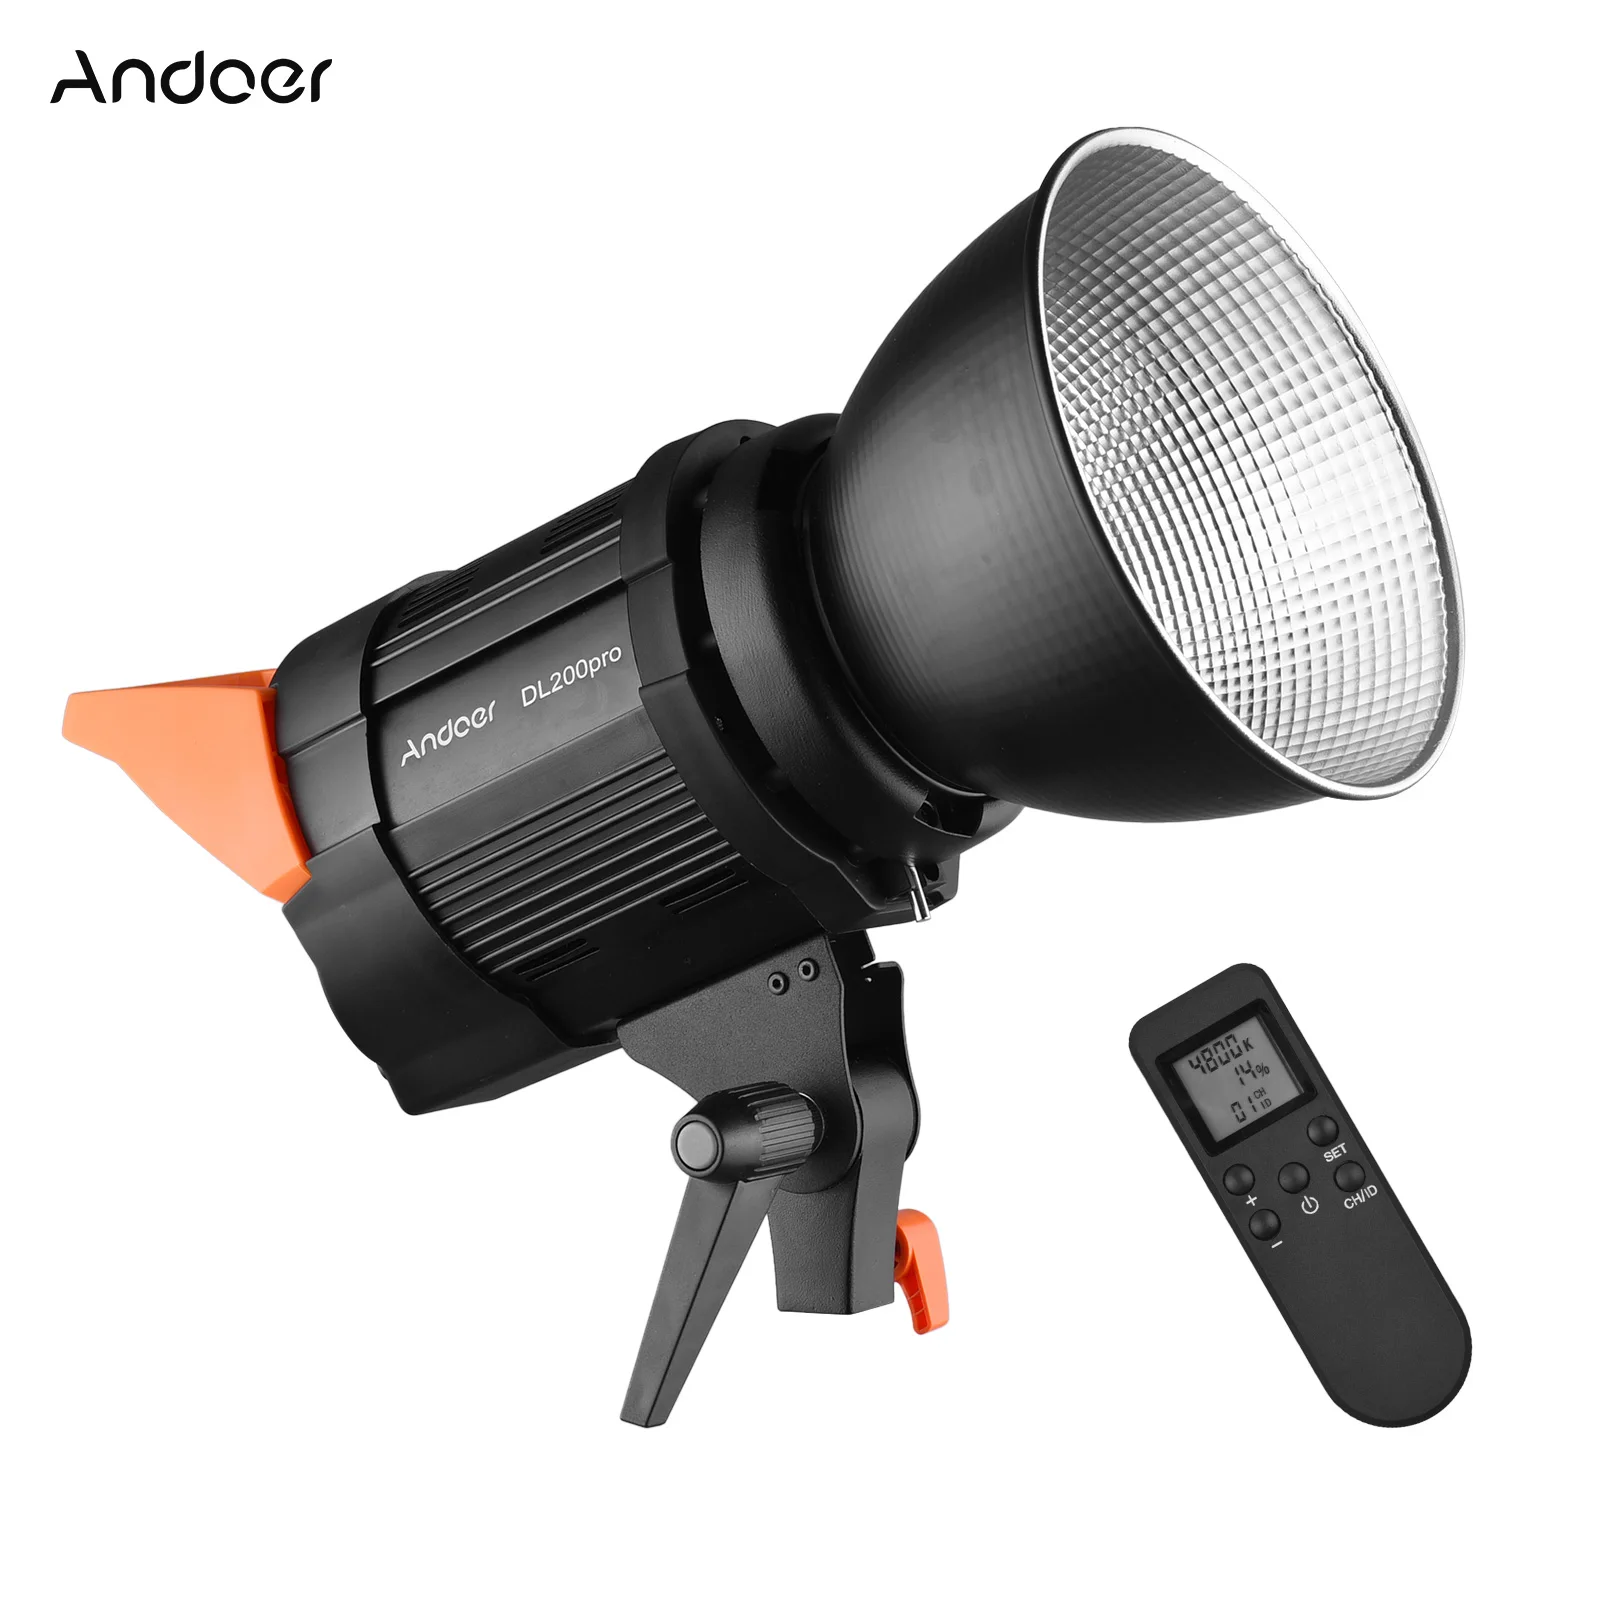 

Photo Studio LED Video Light Photography 200W Bi-color 3200-5600K Dimmable Brightness CRI 95+ with Bowens Mount Remote Control